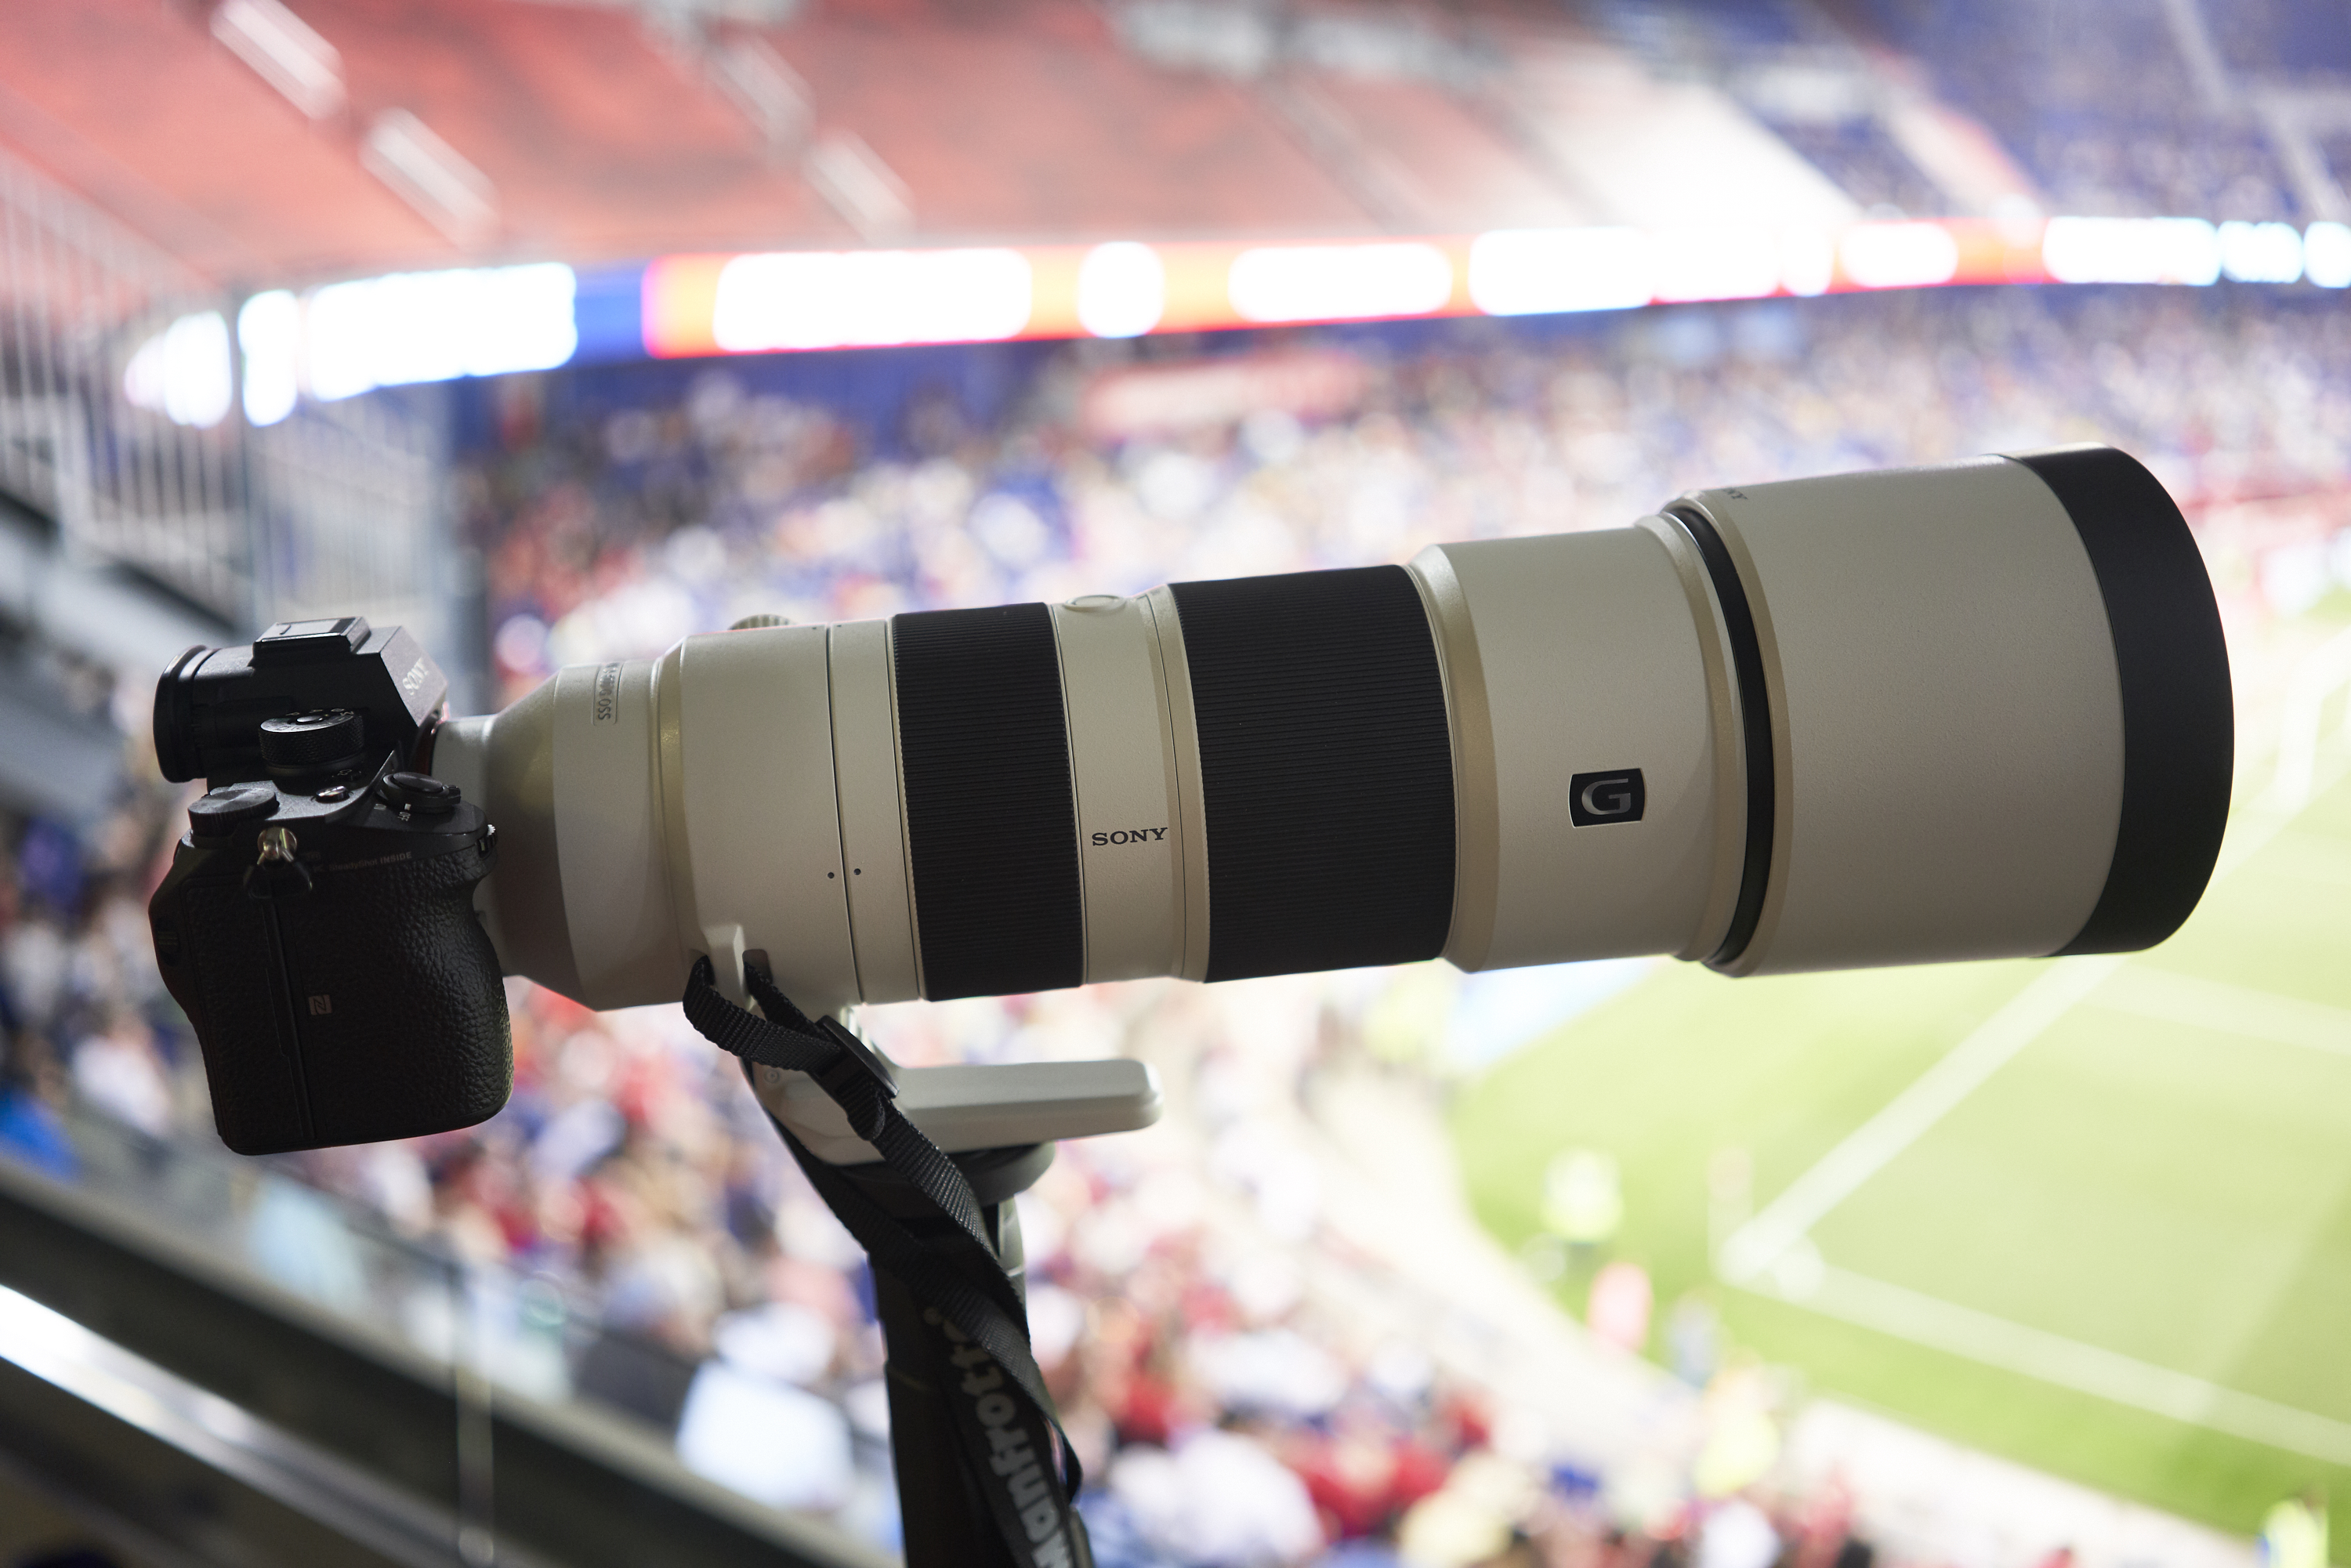 First Impressions: Sony 200-600mm f5.6-6.3 G OSS (FE Lens)